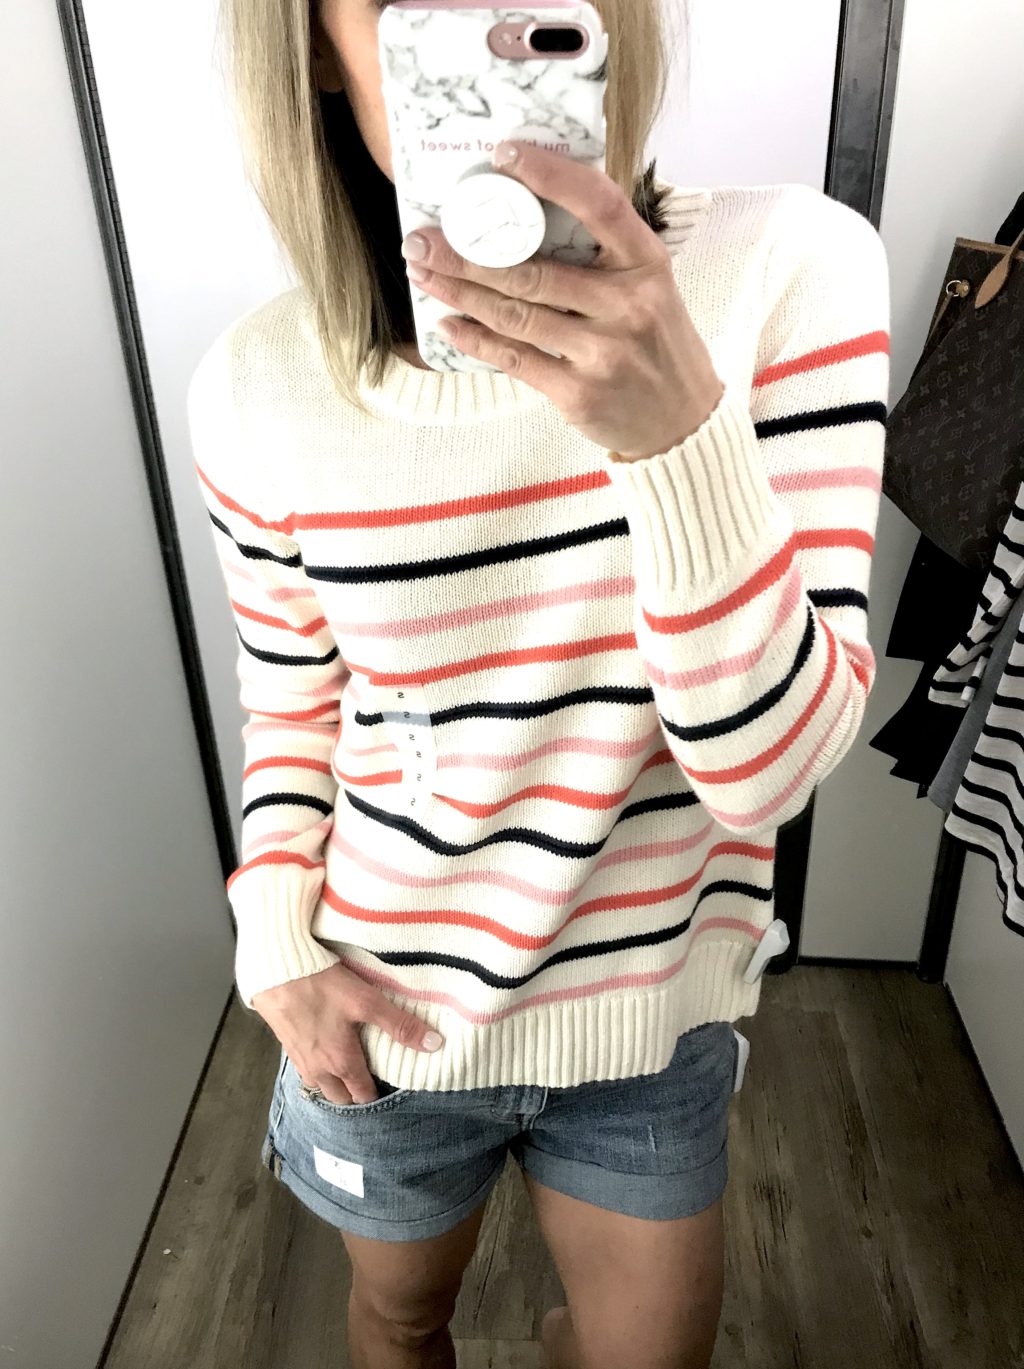 Old Navy try-on haul, striped sweater and denim shorts